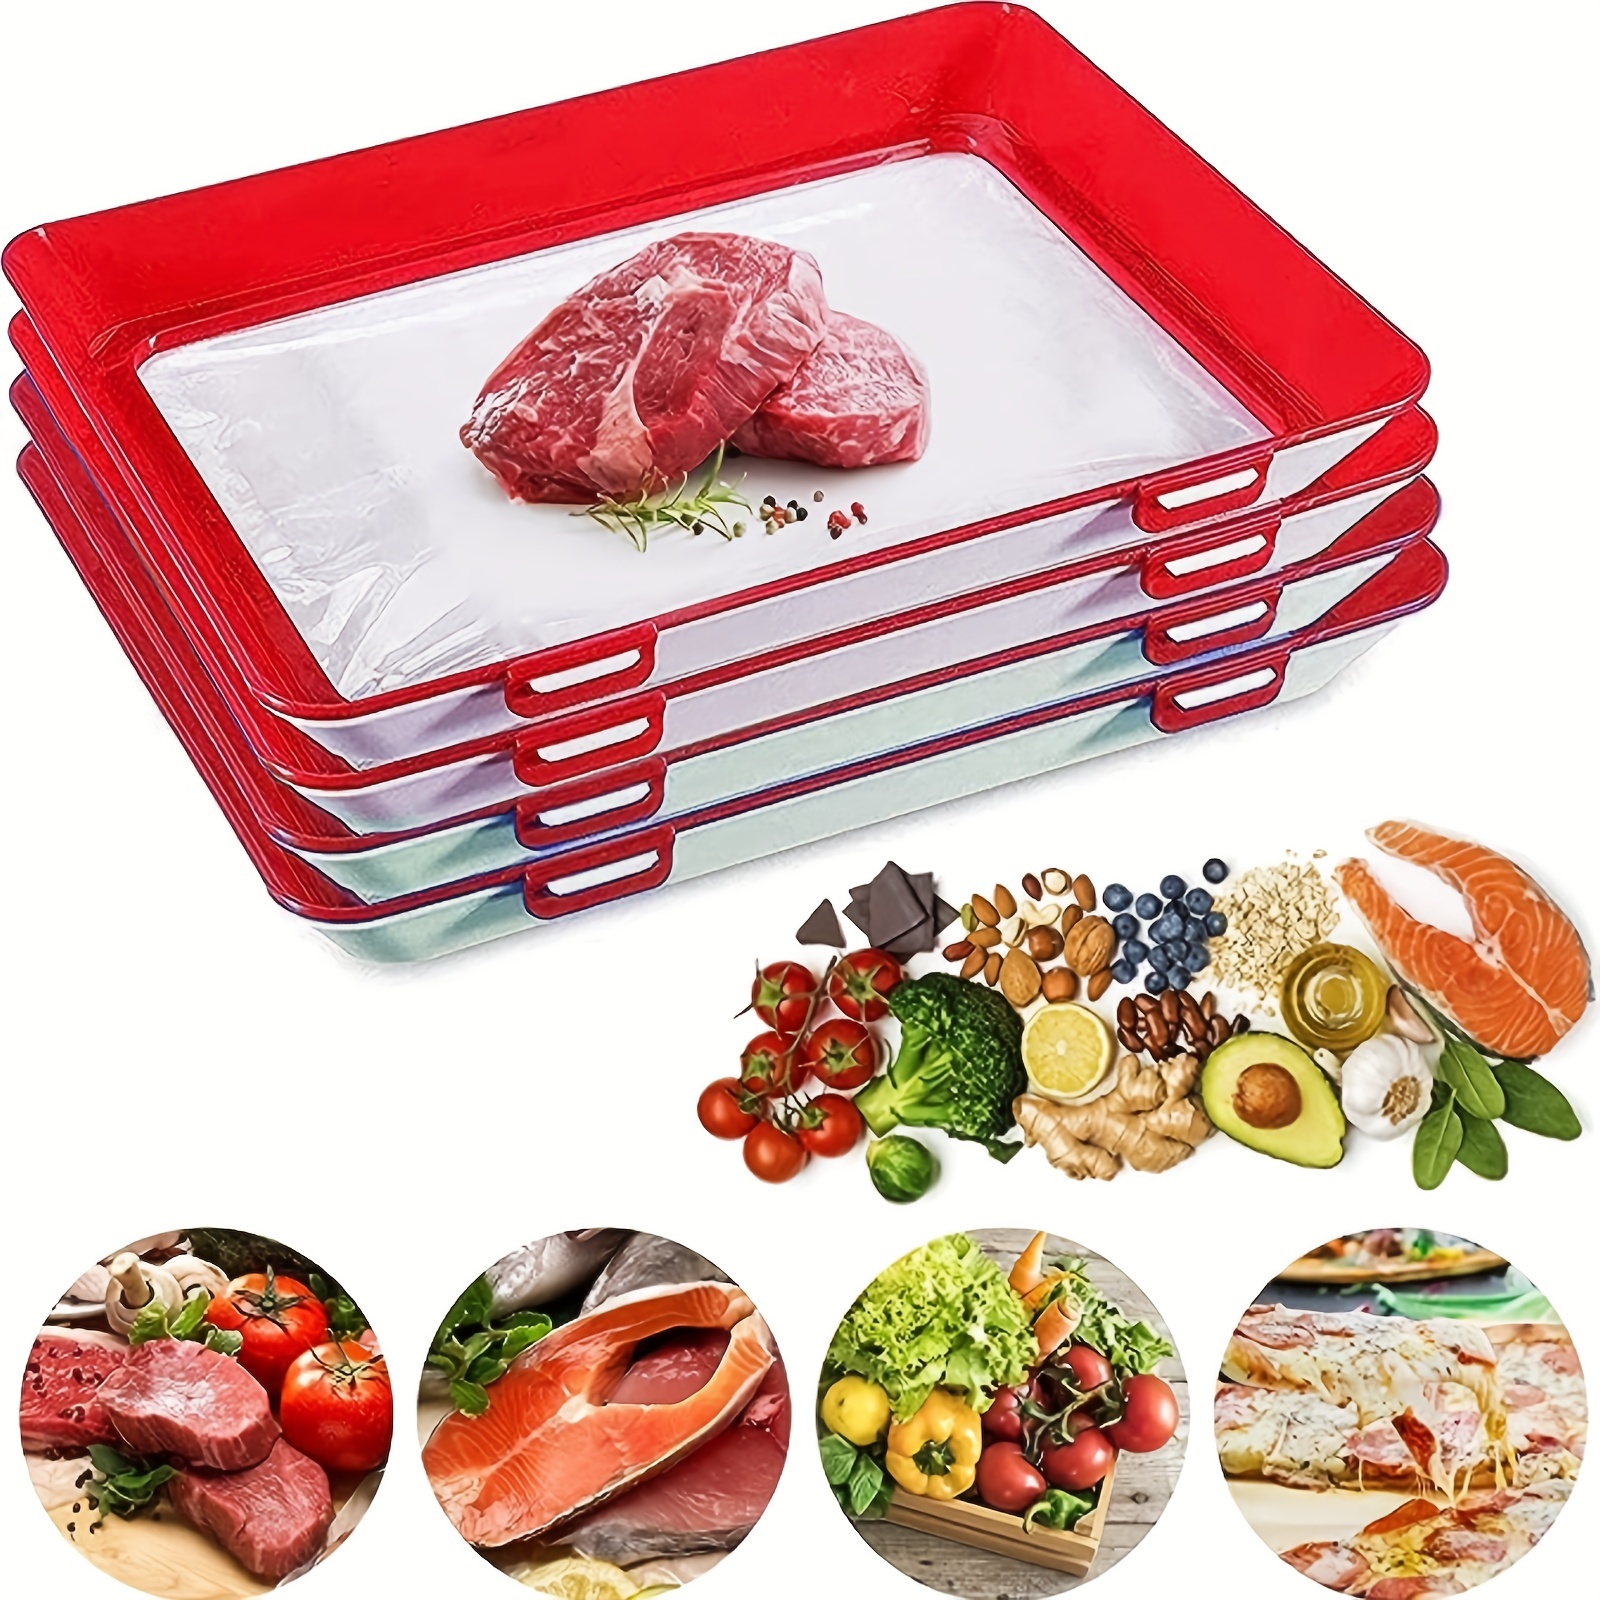 Food Plastic Preservation Tray, Stackable Food Tray Reusable Creative Fresh Tray Storage for Food Preservation (4 Pack)